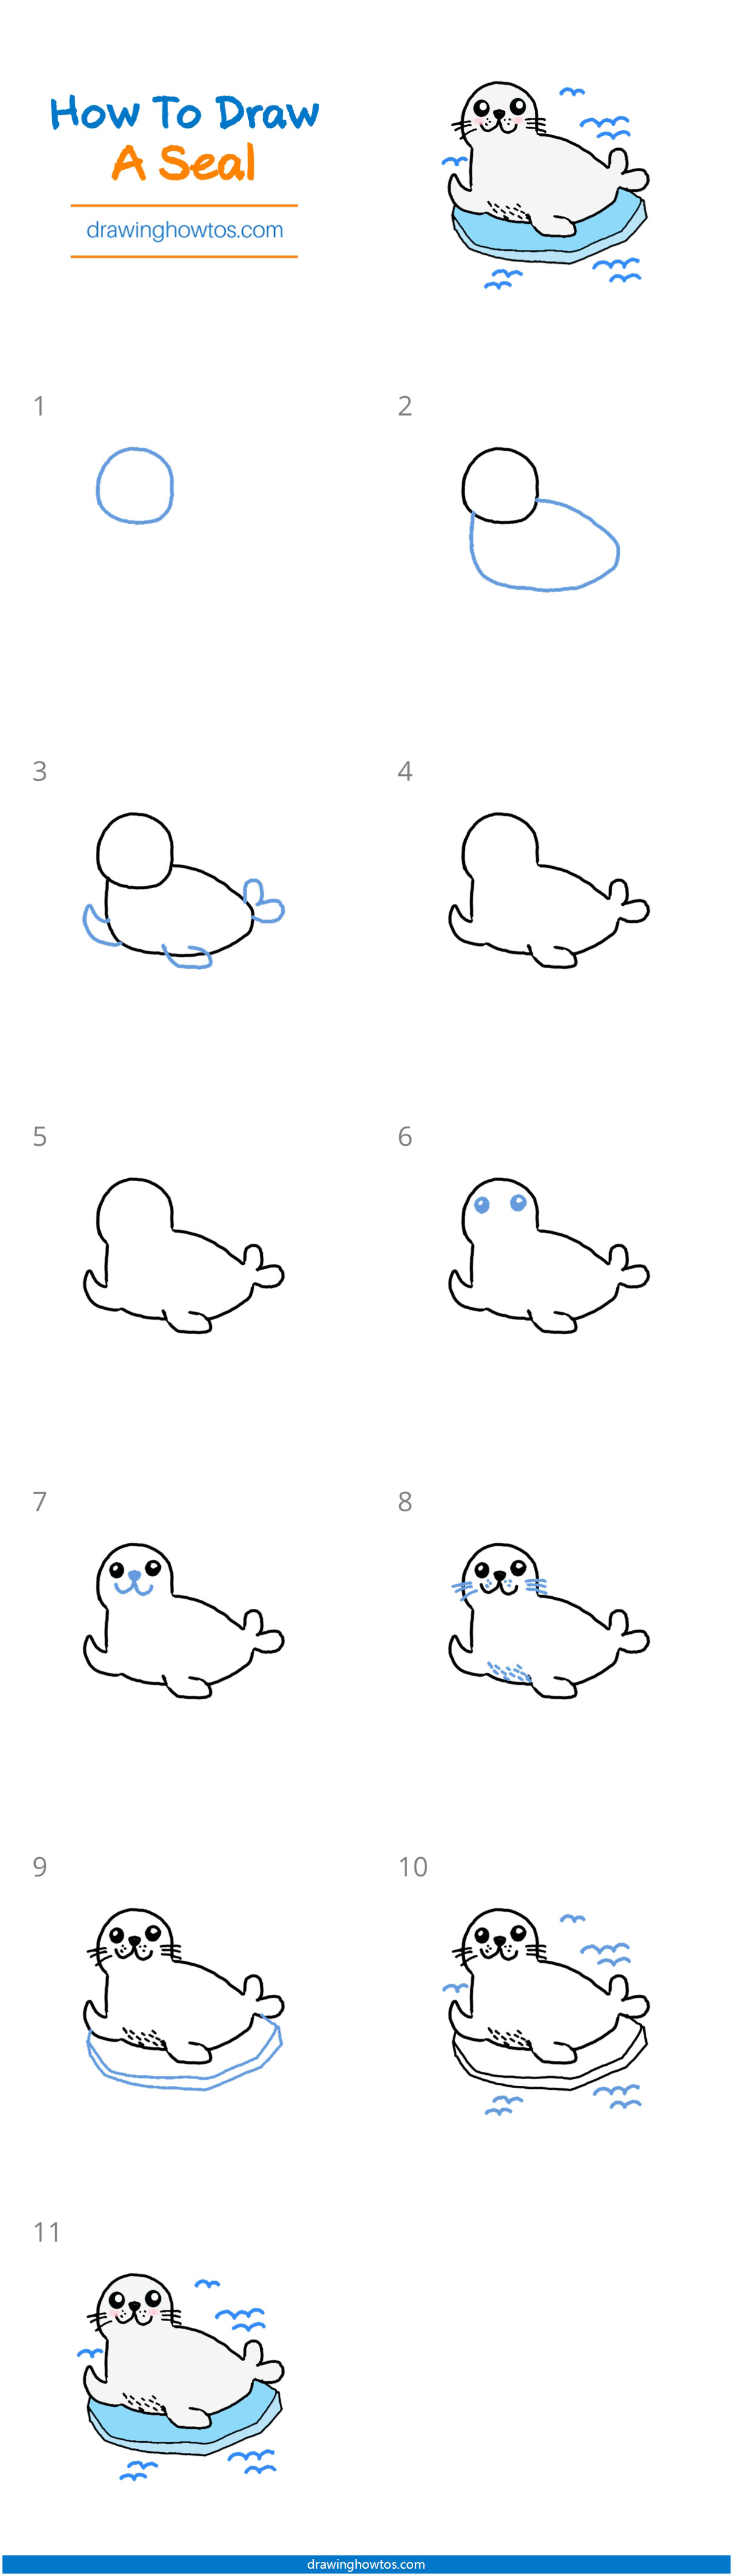 How to Draw a Seal Step by Step